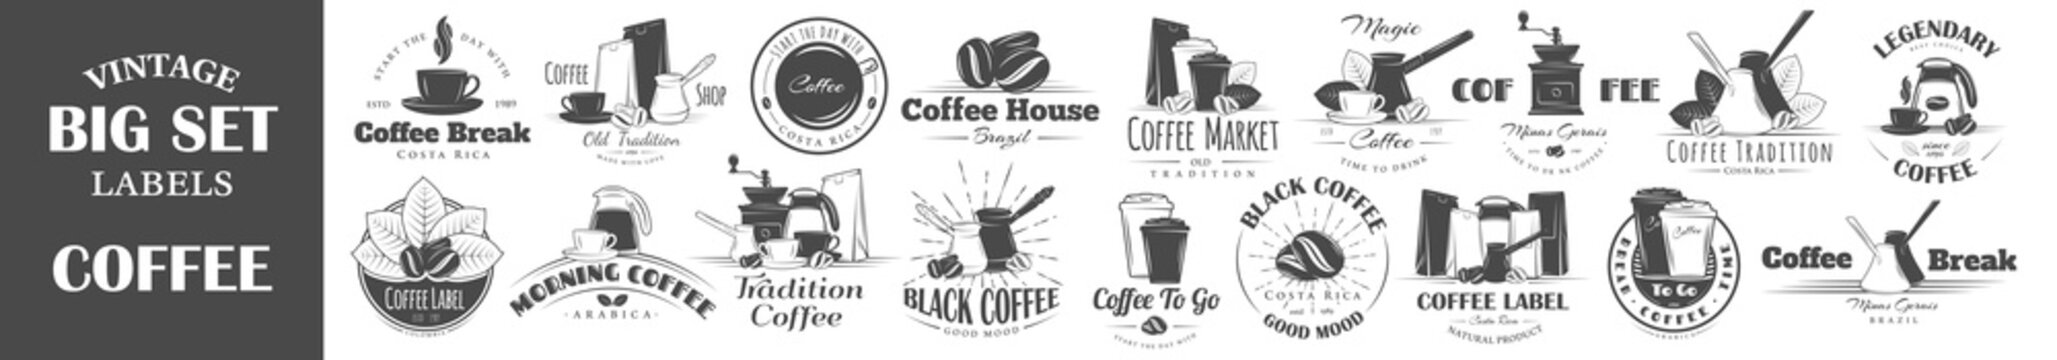 Set of vintage coffee labels. Posters, stamps, banners and design elements. Vector illustration